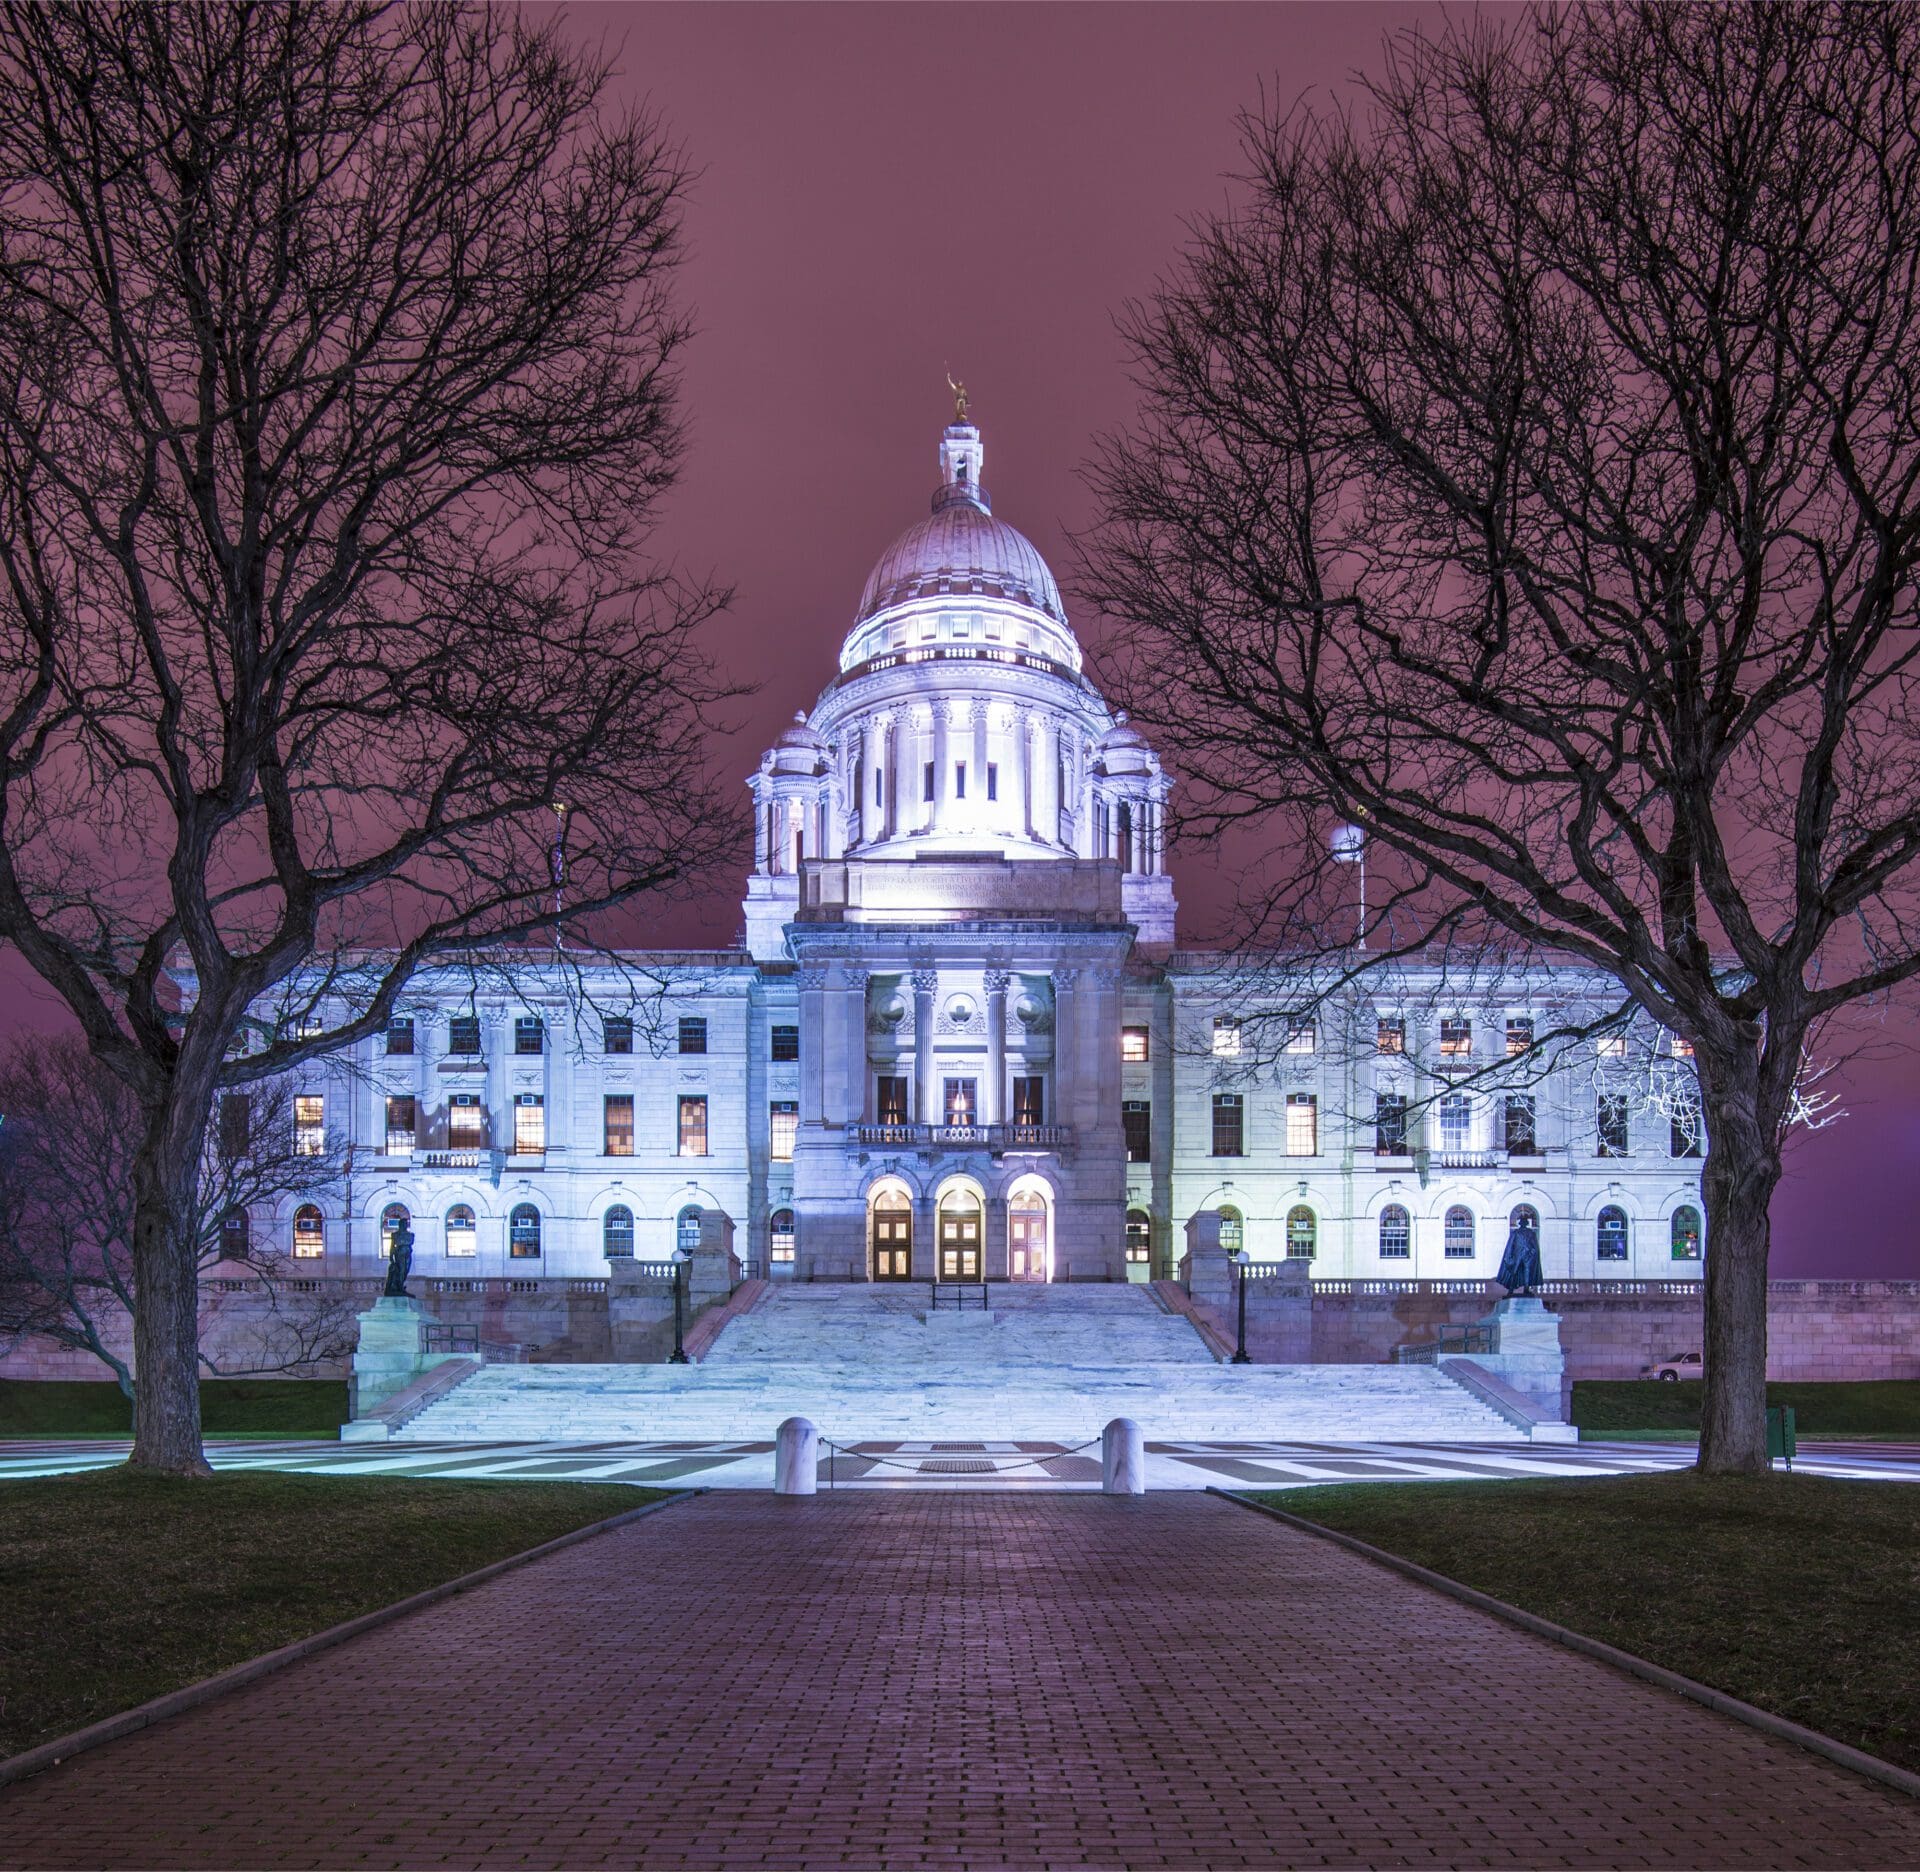 The state capitol building is lit up at night.